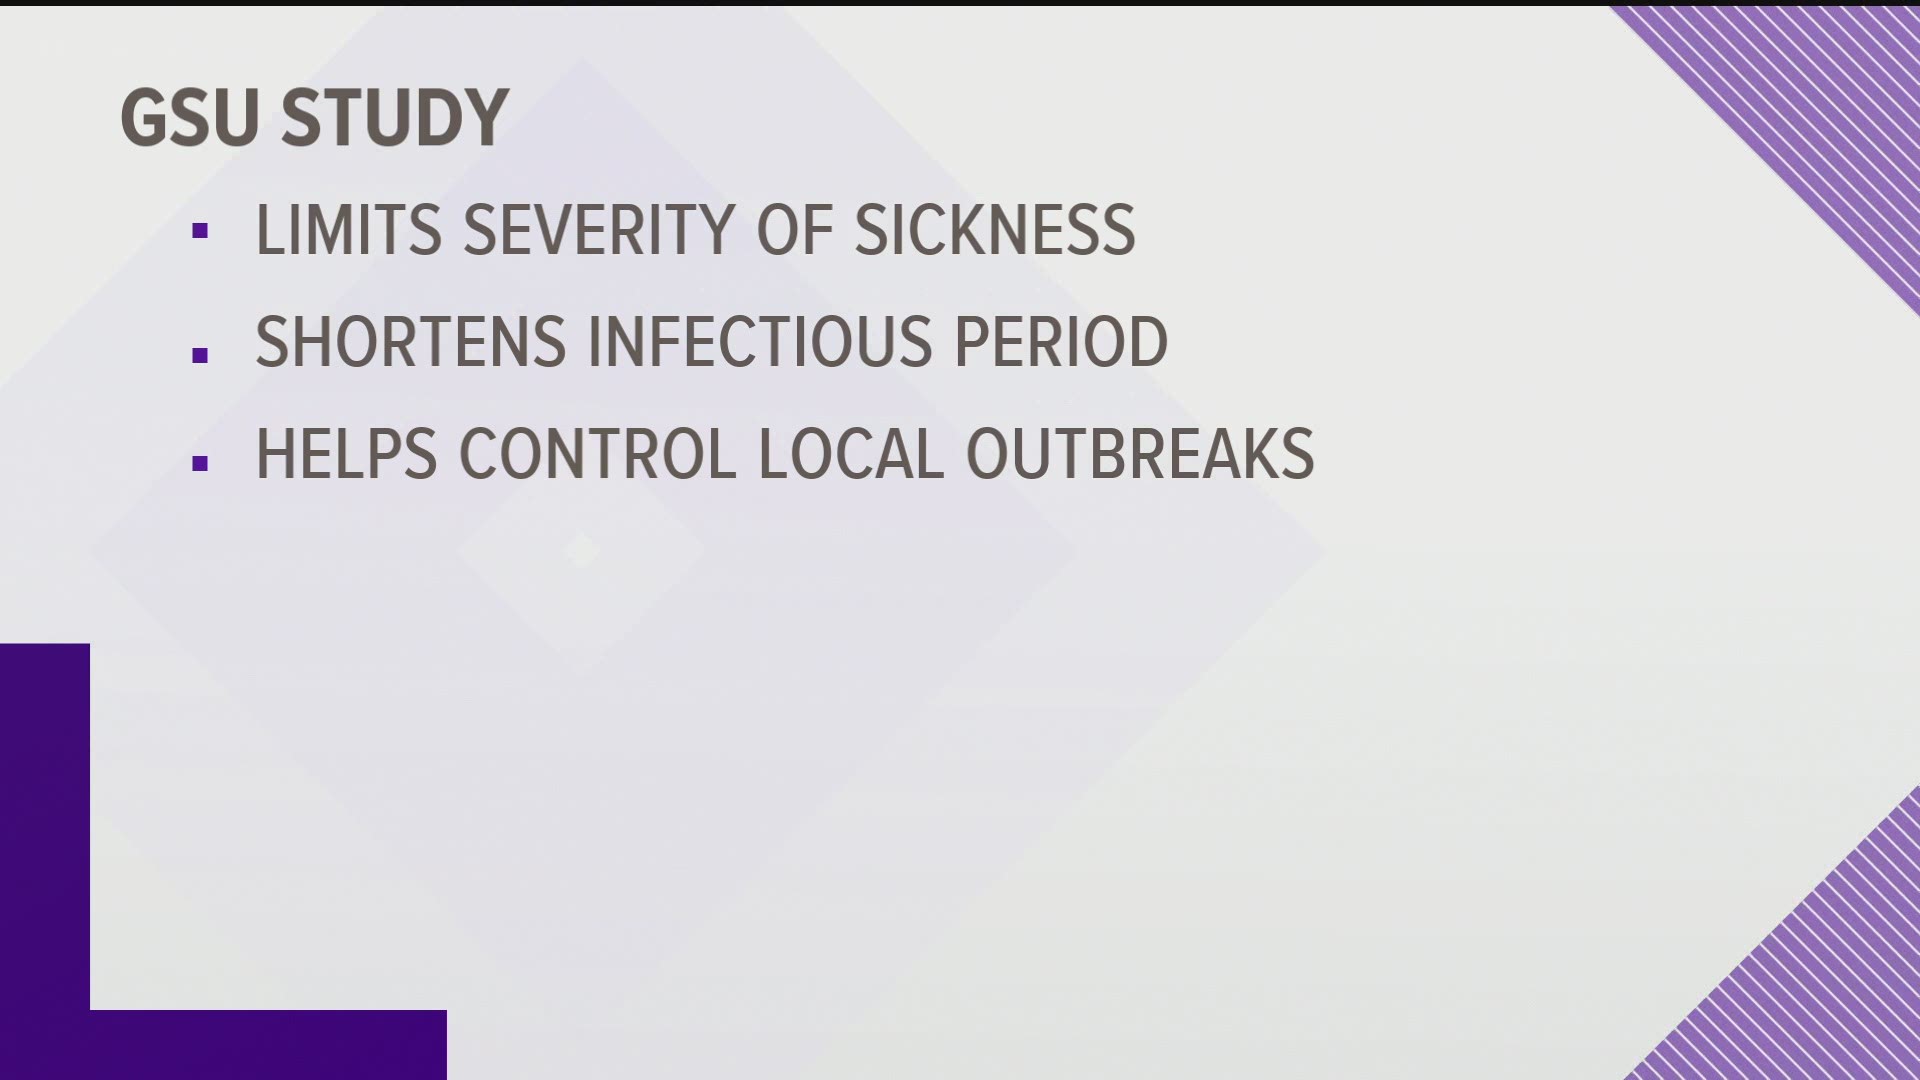 They said it could also shorten the infectious period and help control outbreaks.